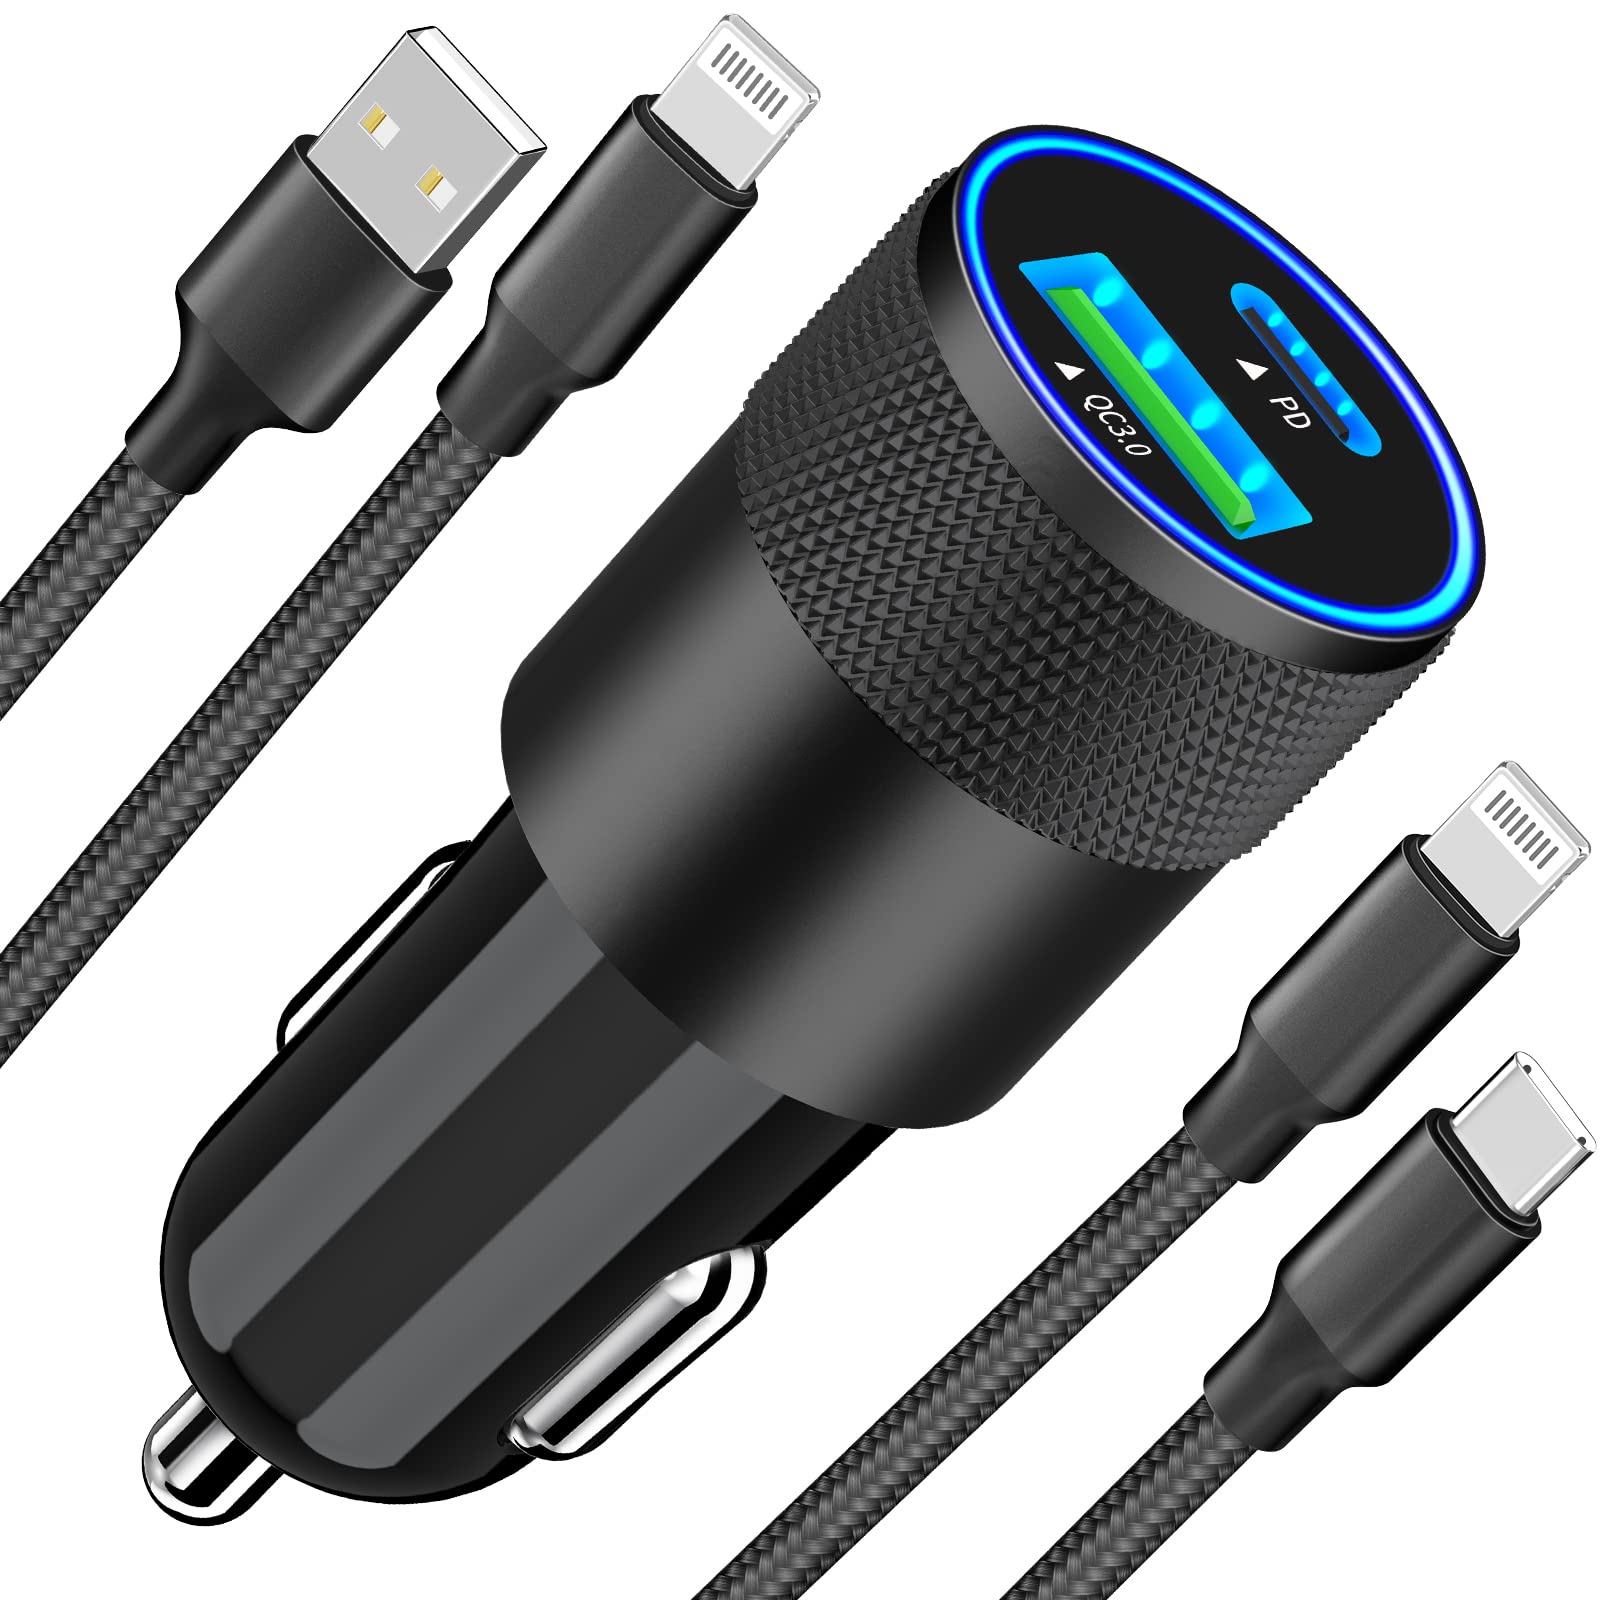 [Apple MFi Certified] iPhone Car Charger Fast Charging, Braveridge 48W Dual USB-C PD/QC3.0 Power Car Charge Adapter + 2Pack Lightning Cable Quick Car Charging for iPhone 14 13 12 11 Pro/XS/XR/X/8/iPad